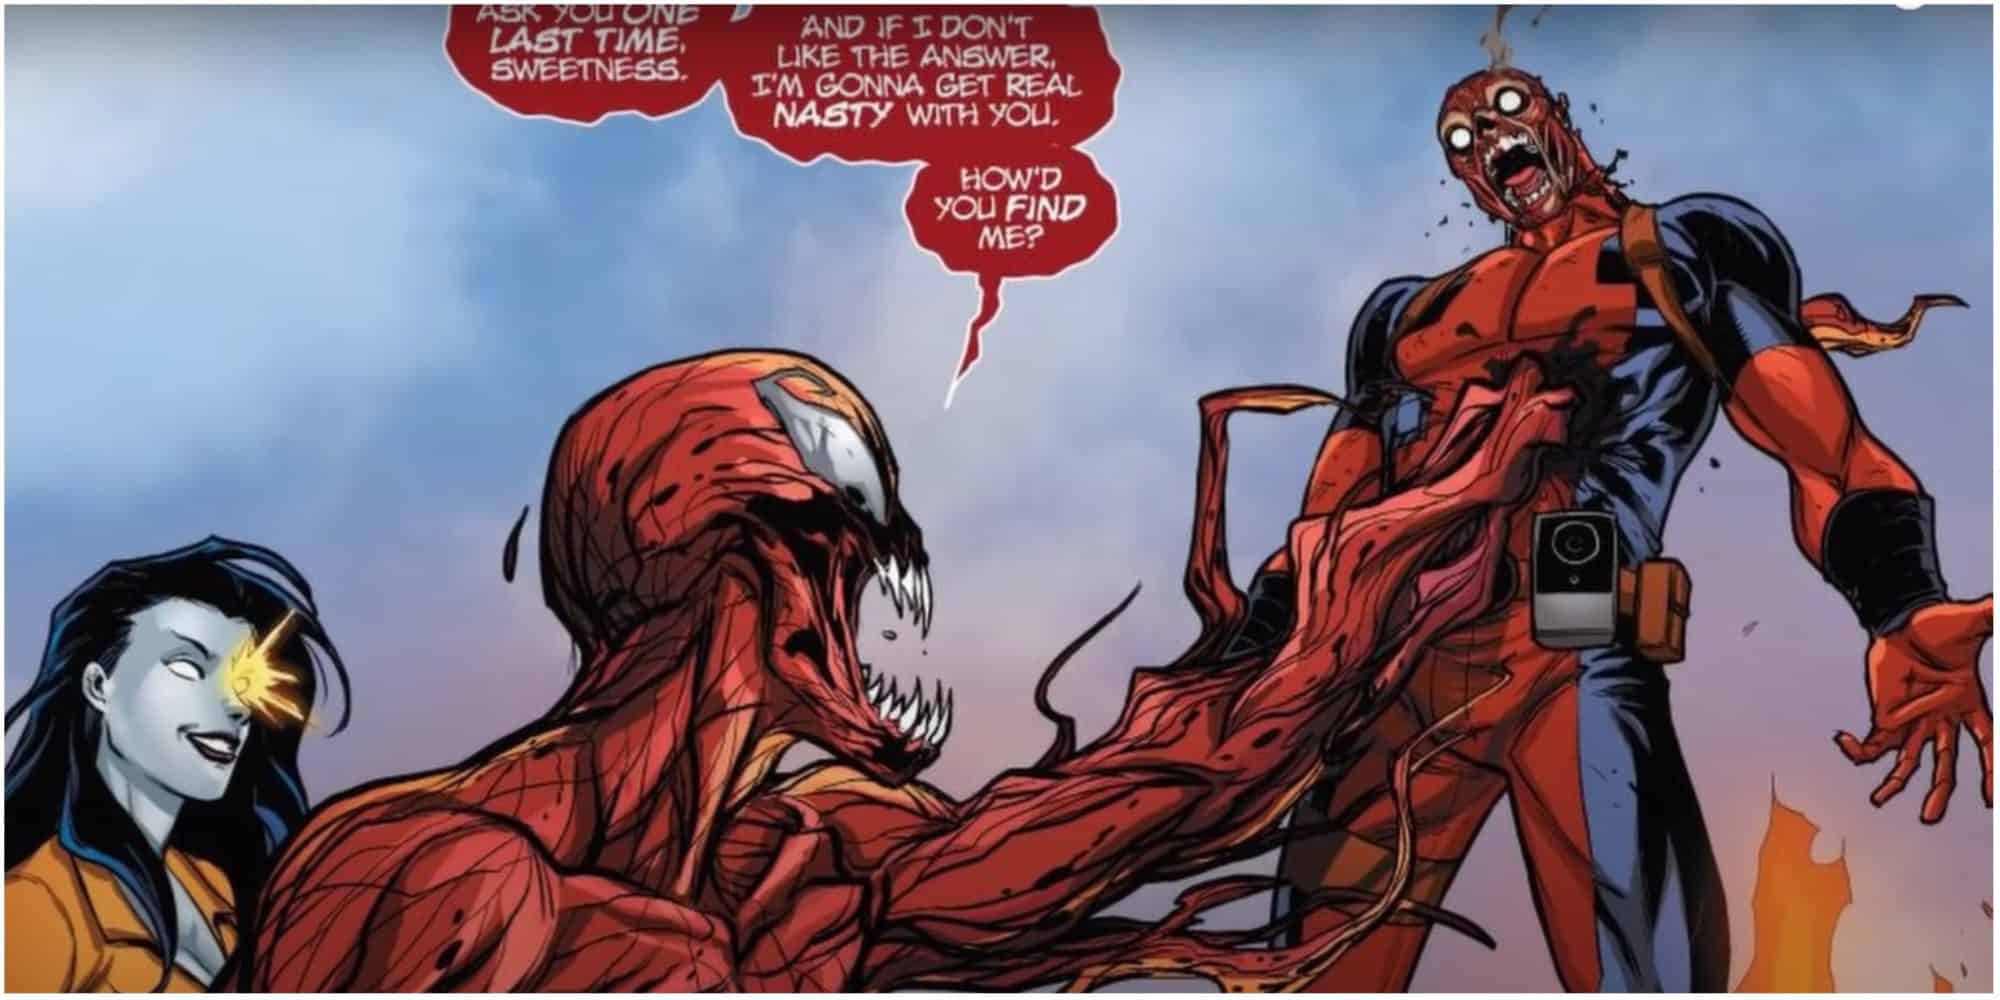 30 Characters Who Can Beat Deadpool - Carnage